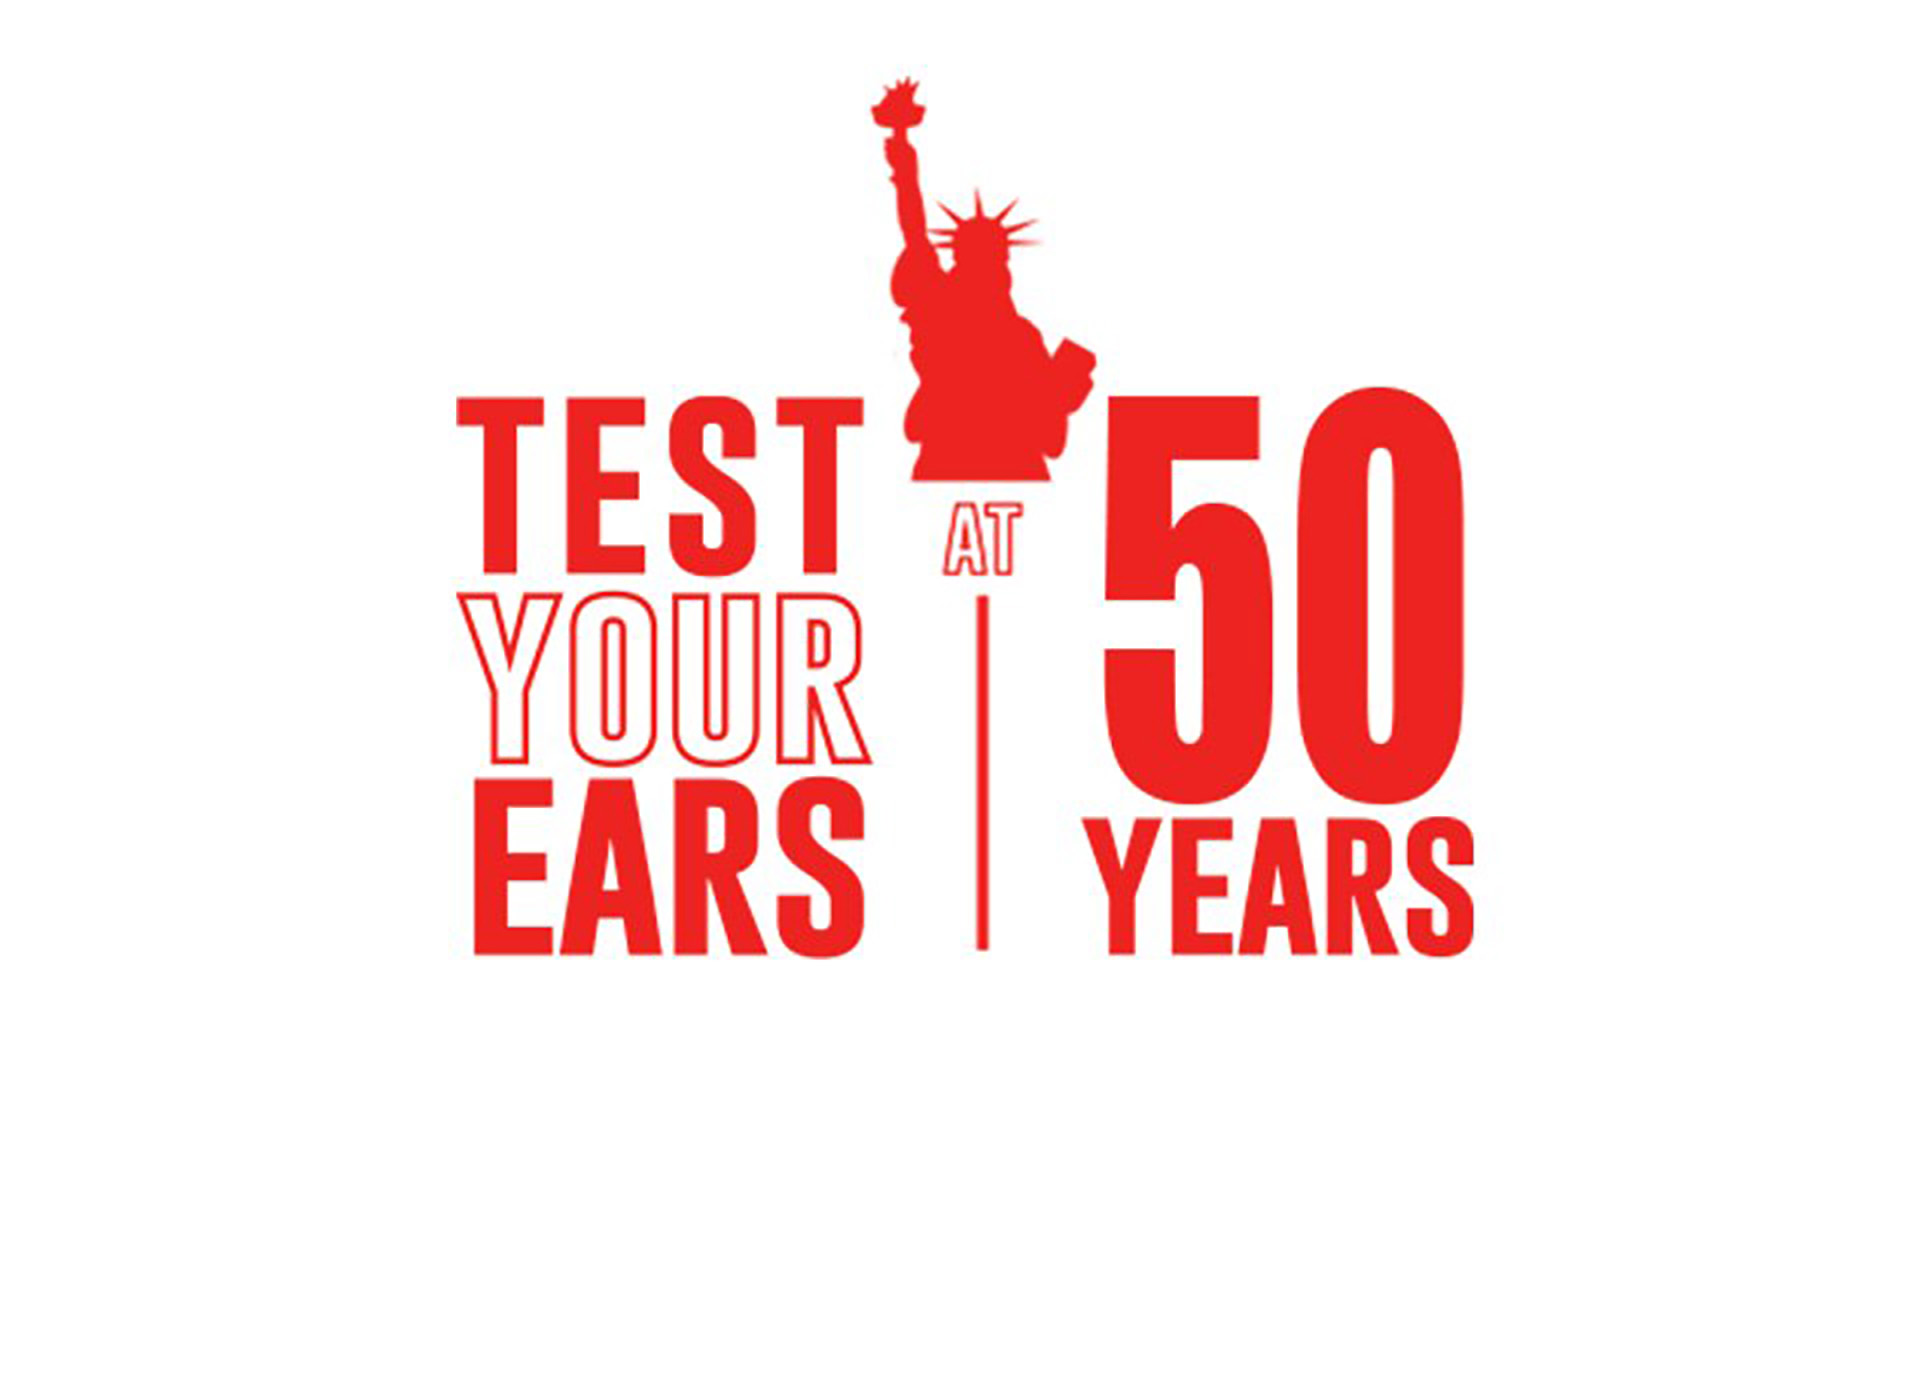 Test your ears at 50 years